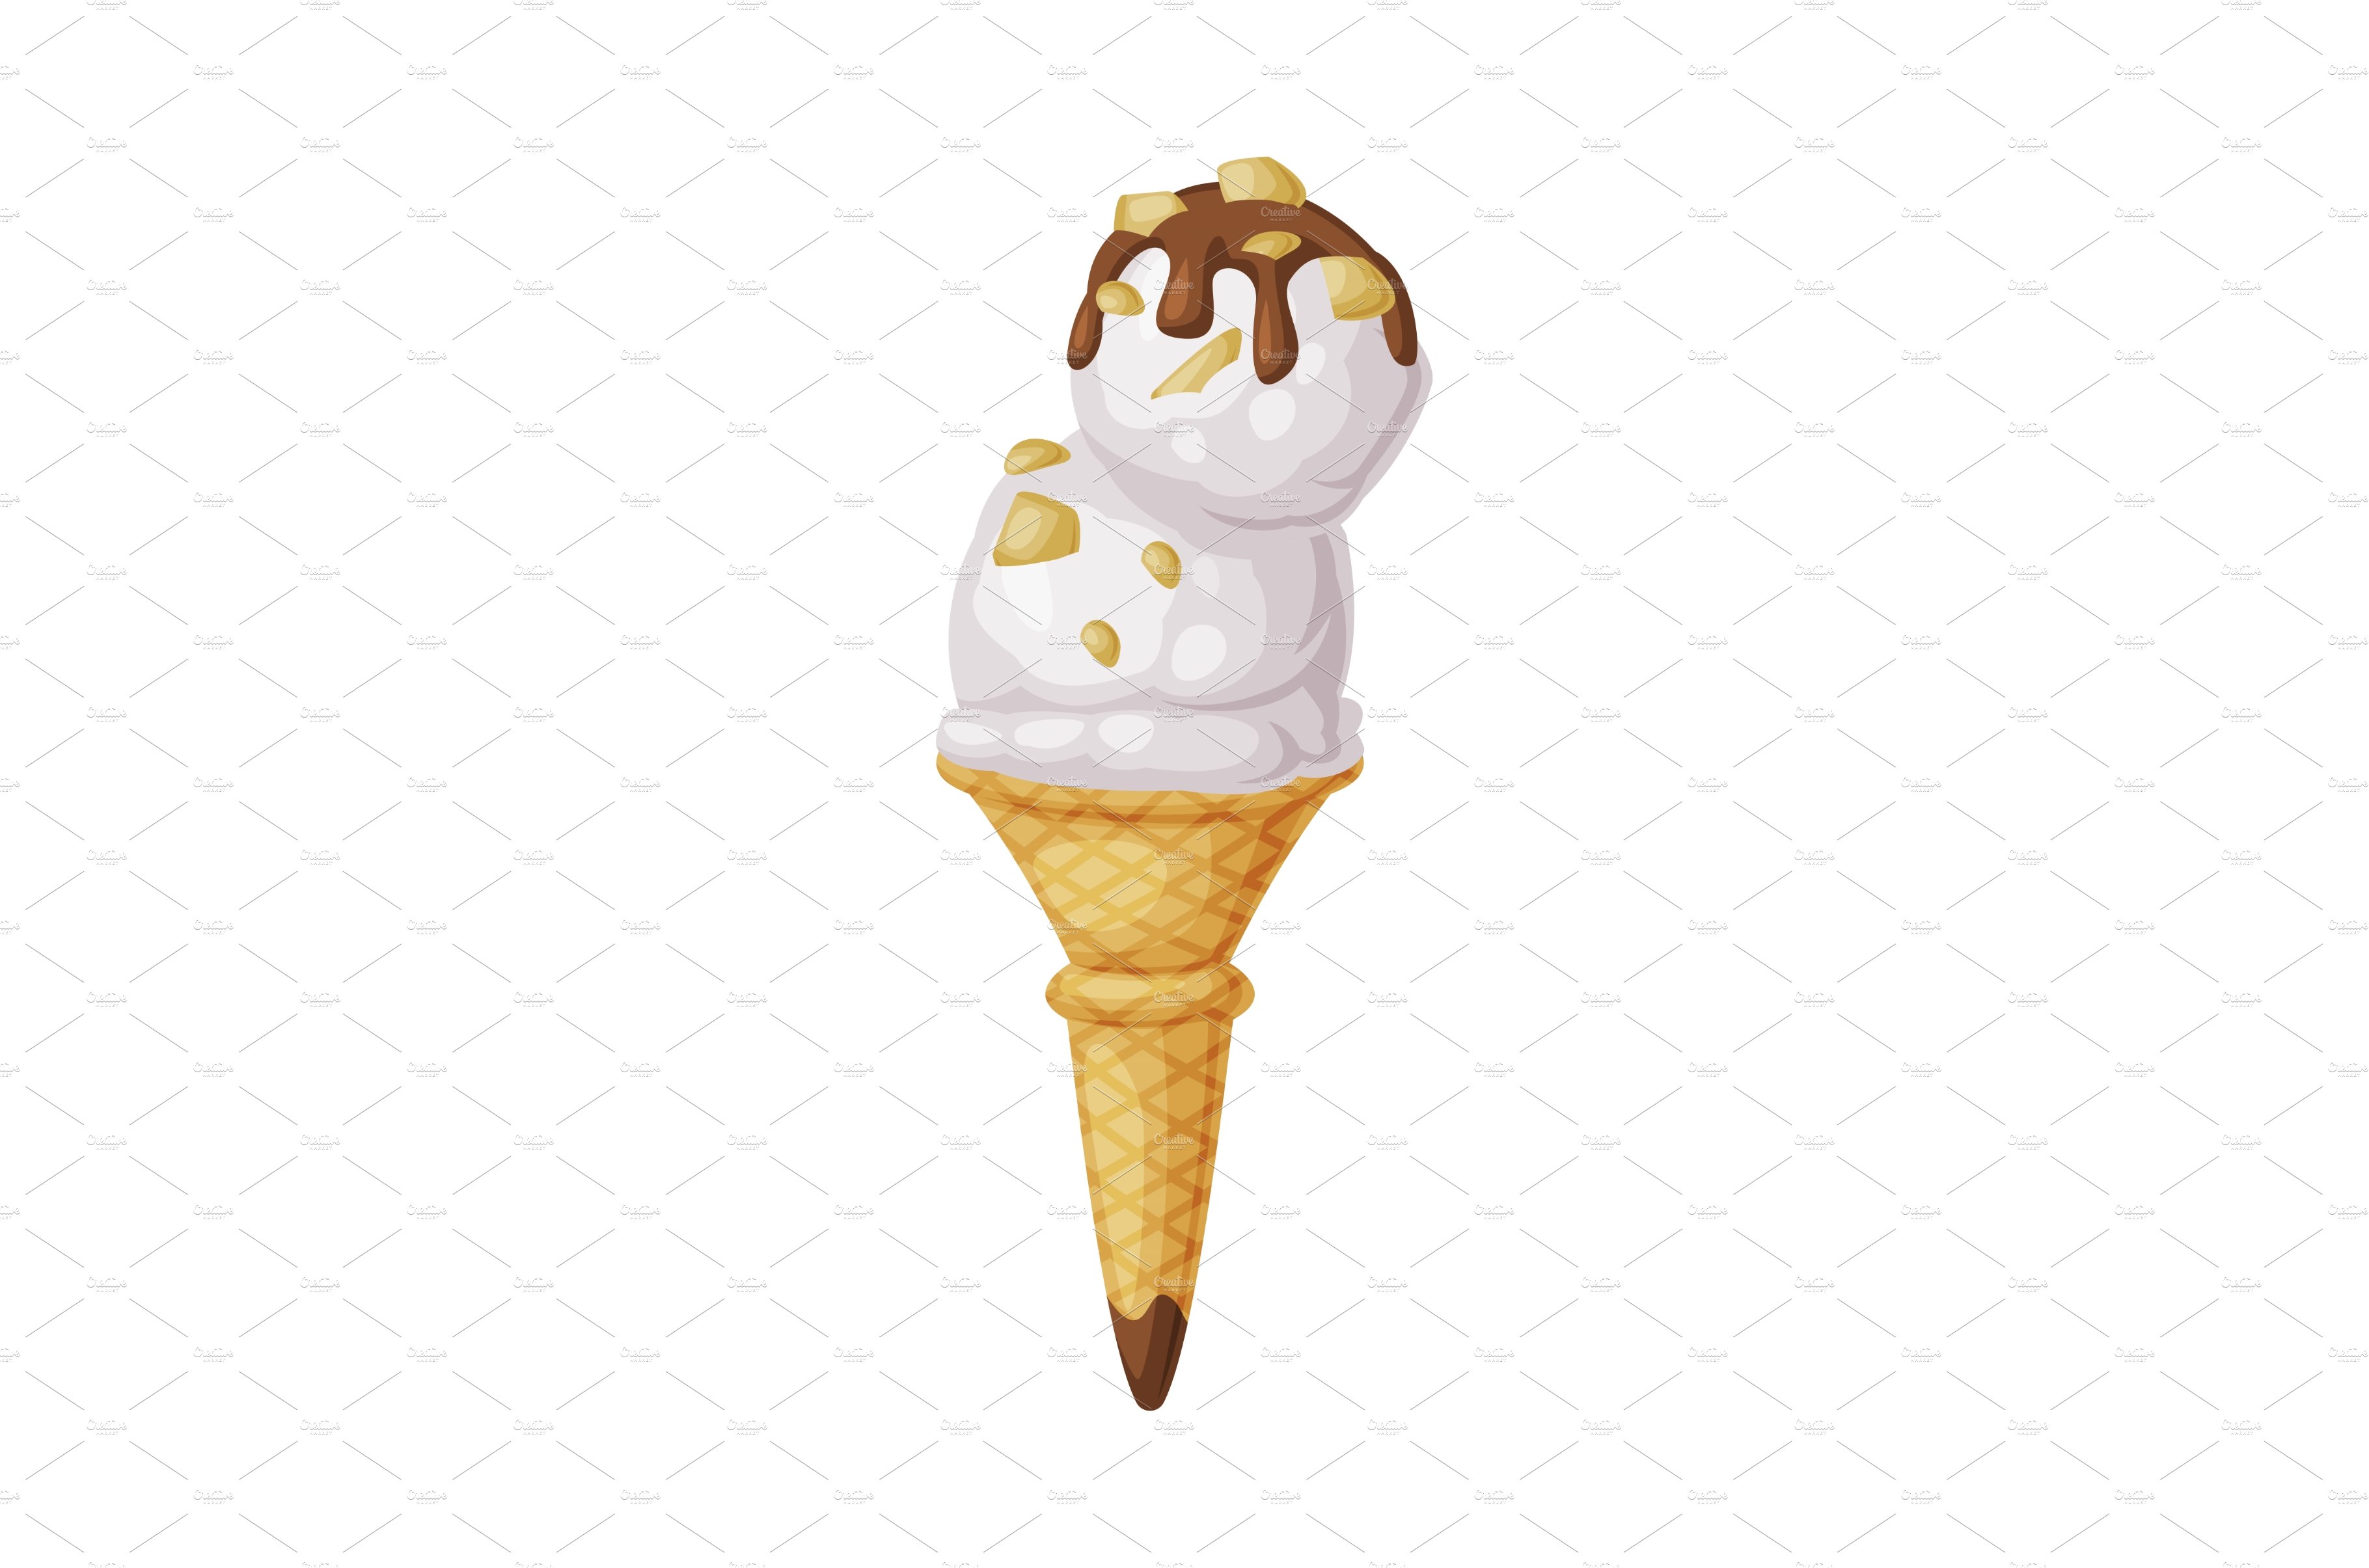 Ice Cream Ball in Waffle Cone with cover image.